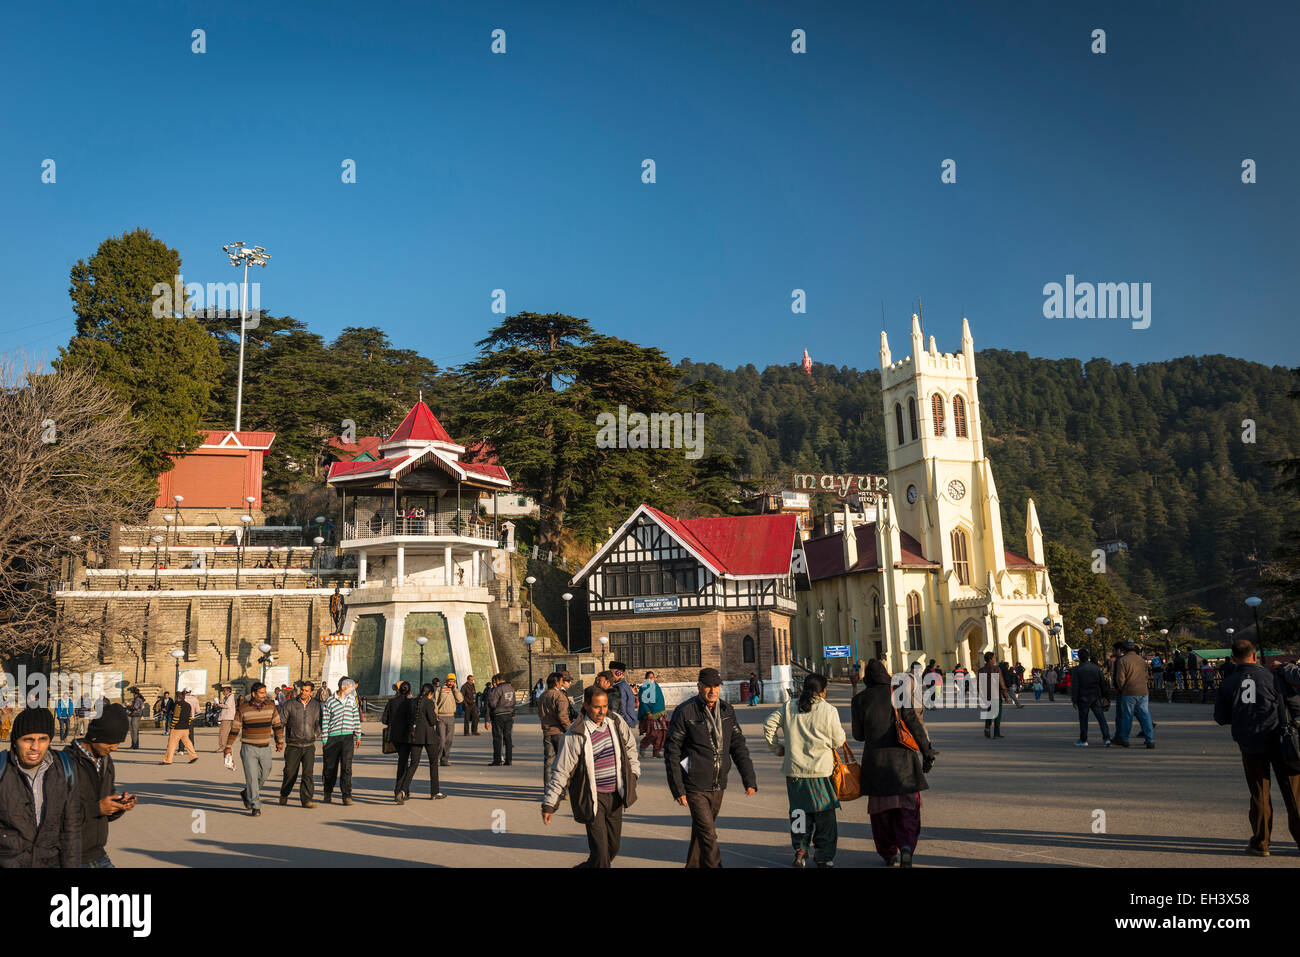 The neo-Gothic Christ Church which stands on The Ridge at Shimla, Himachal Pradesh, India Stock Photo